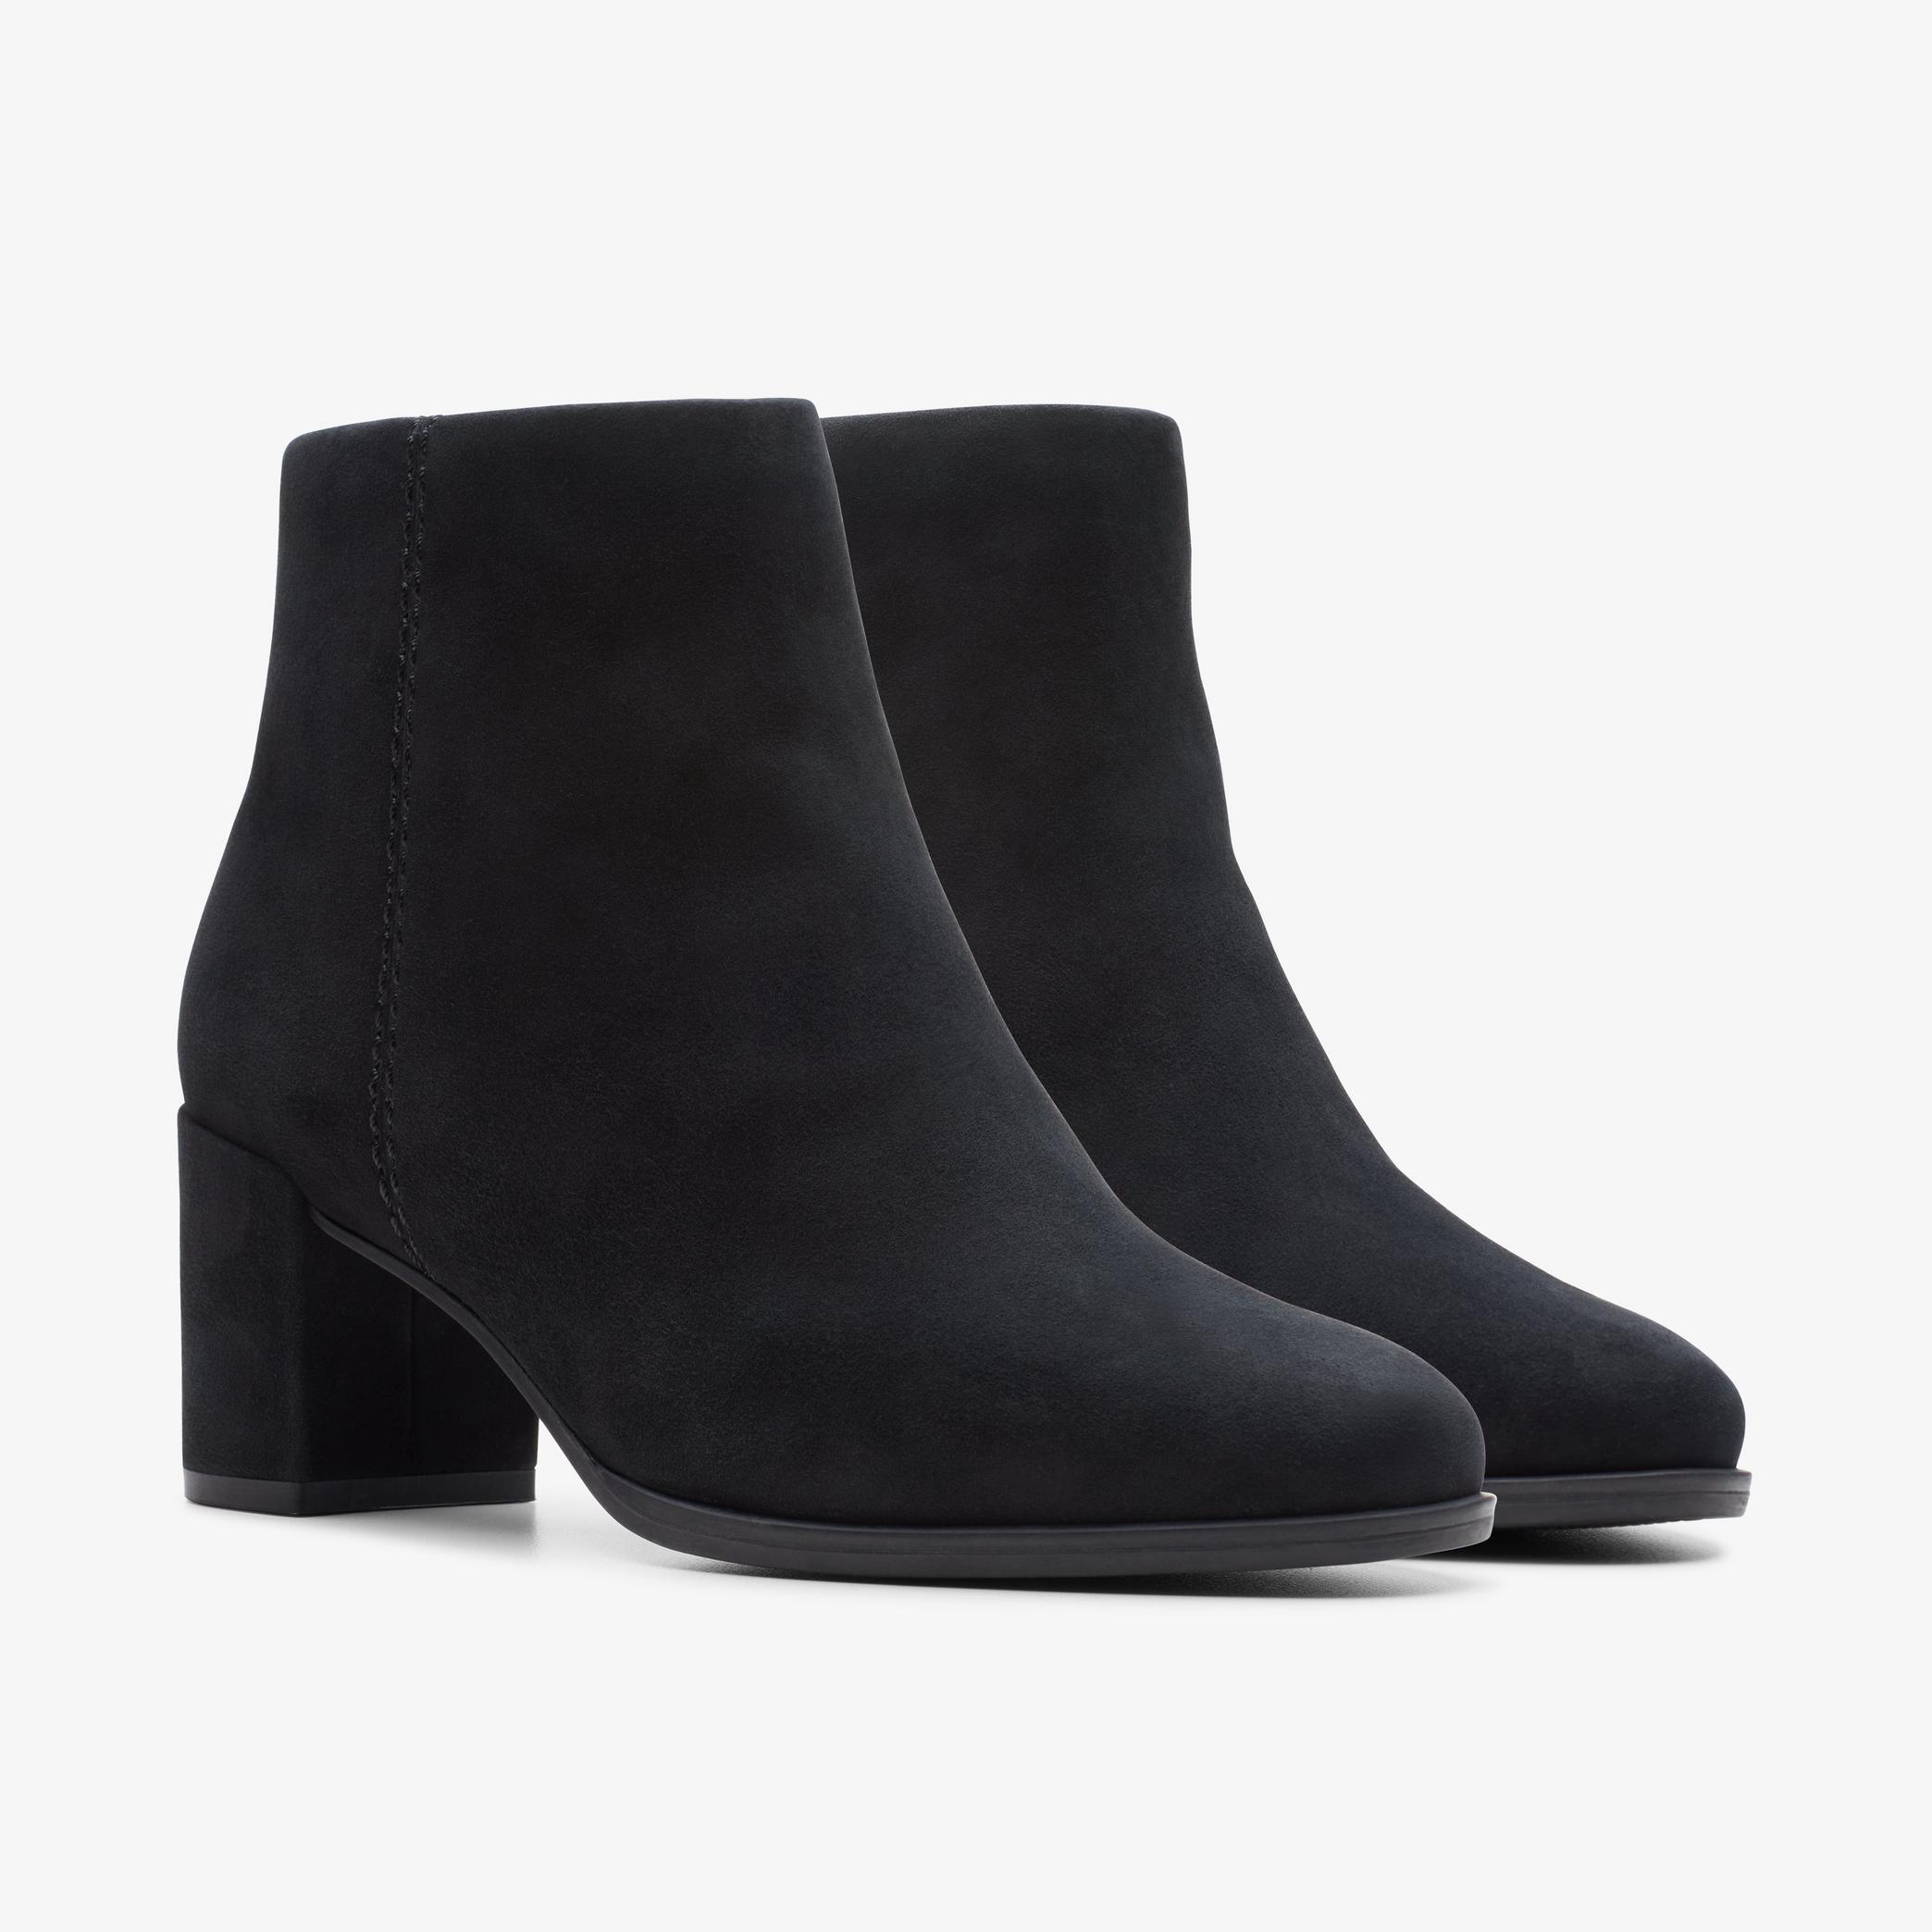 Freva 55 Zip Black Suede Ankle Boots, view 5 of 7